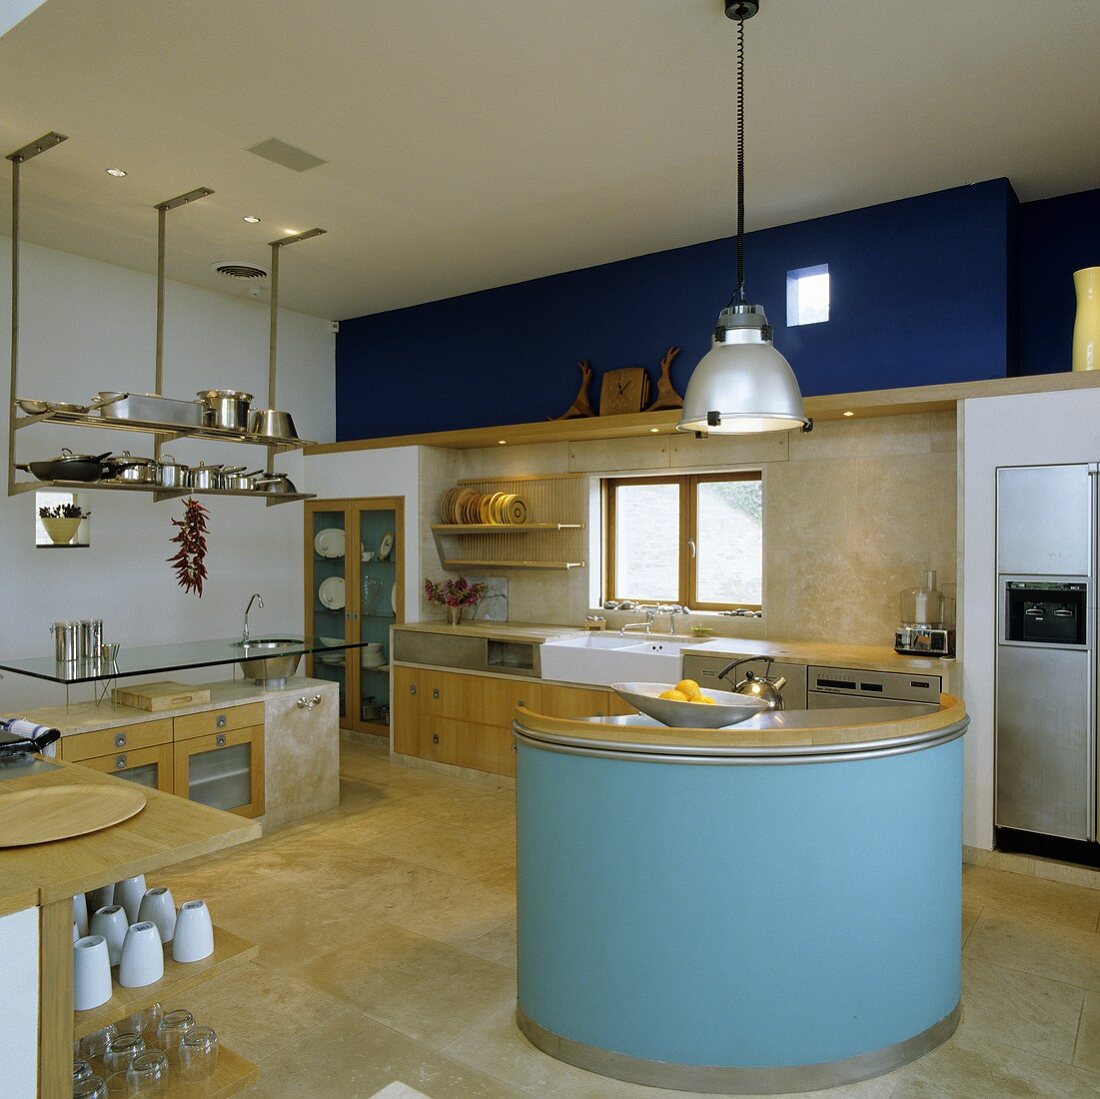 The charm of various materials - a blue-painted, round island counter with concrete kitchen furniture with wooden door in the background